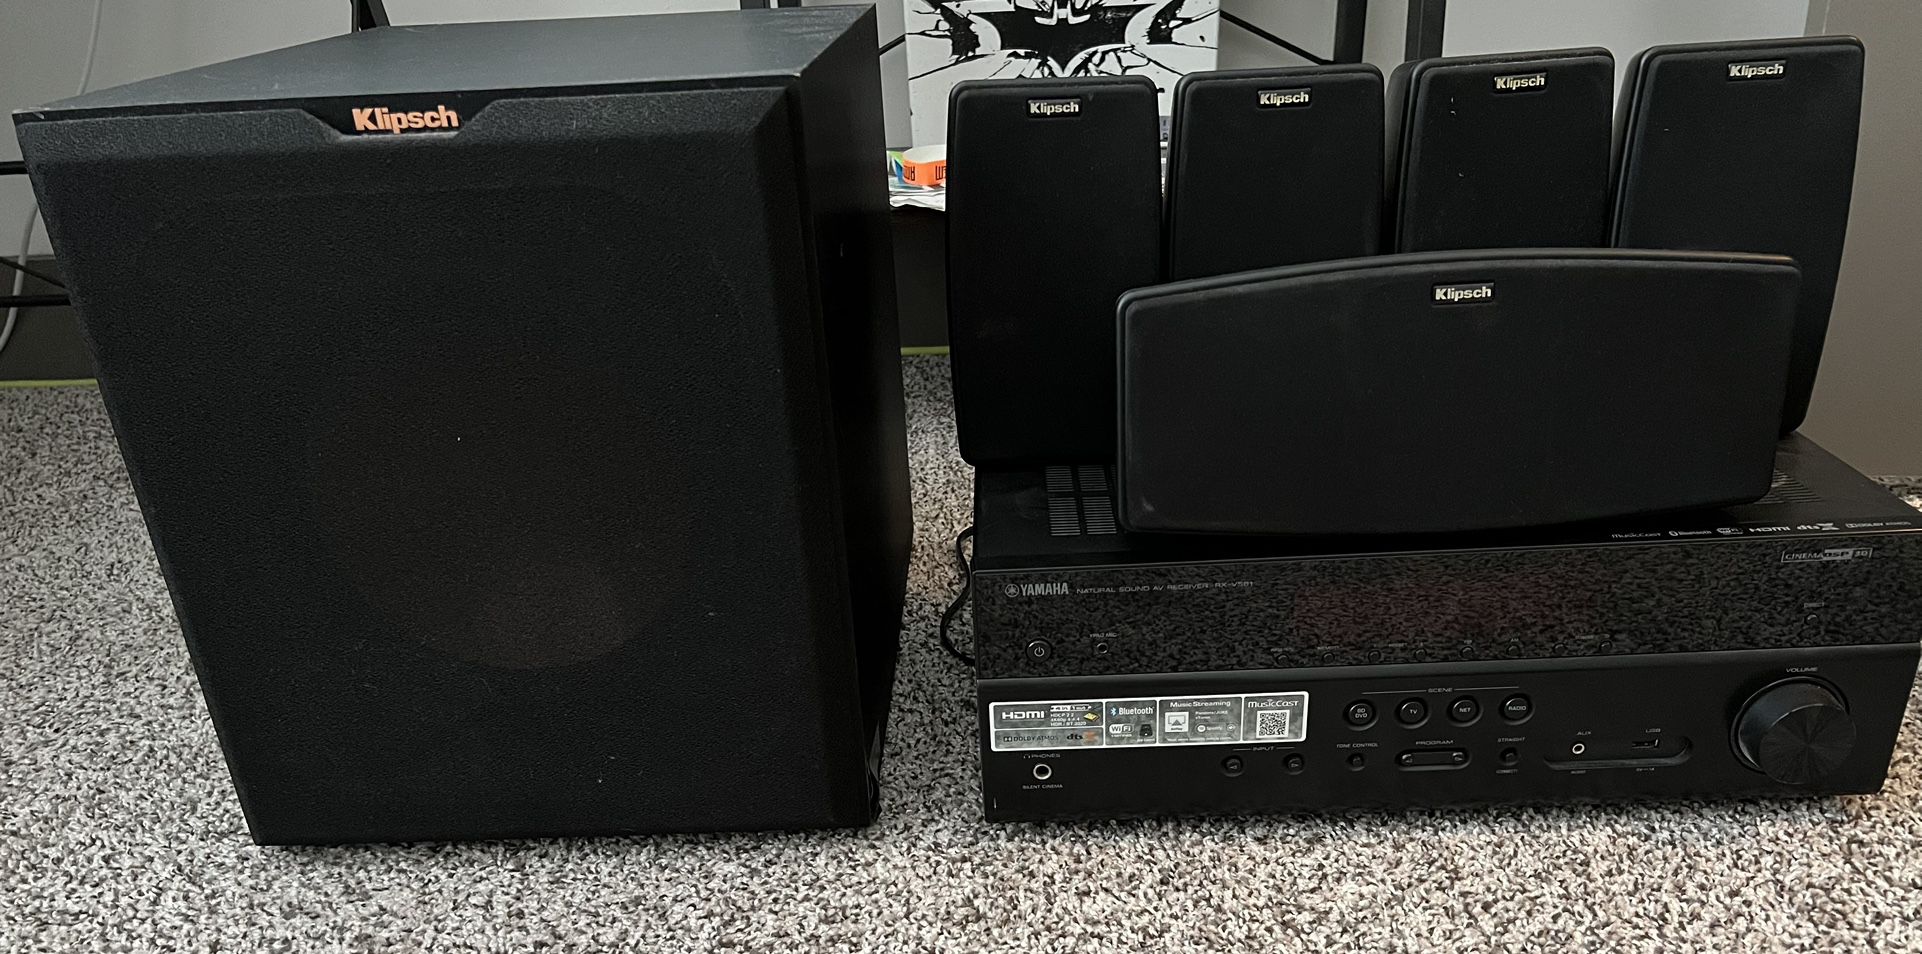 Home Theater System altogether Price $325 Individual Item Price In Description